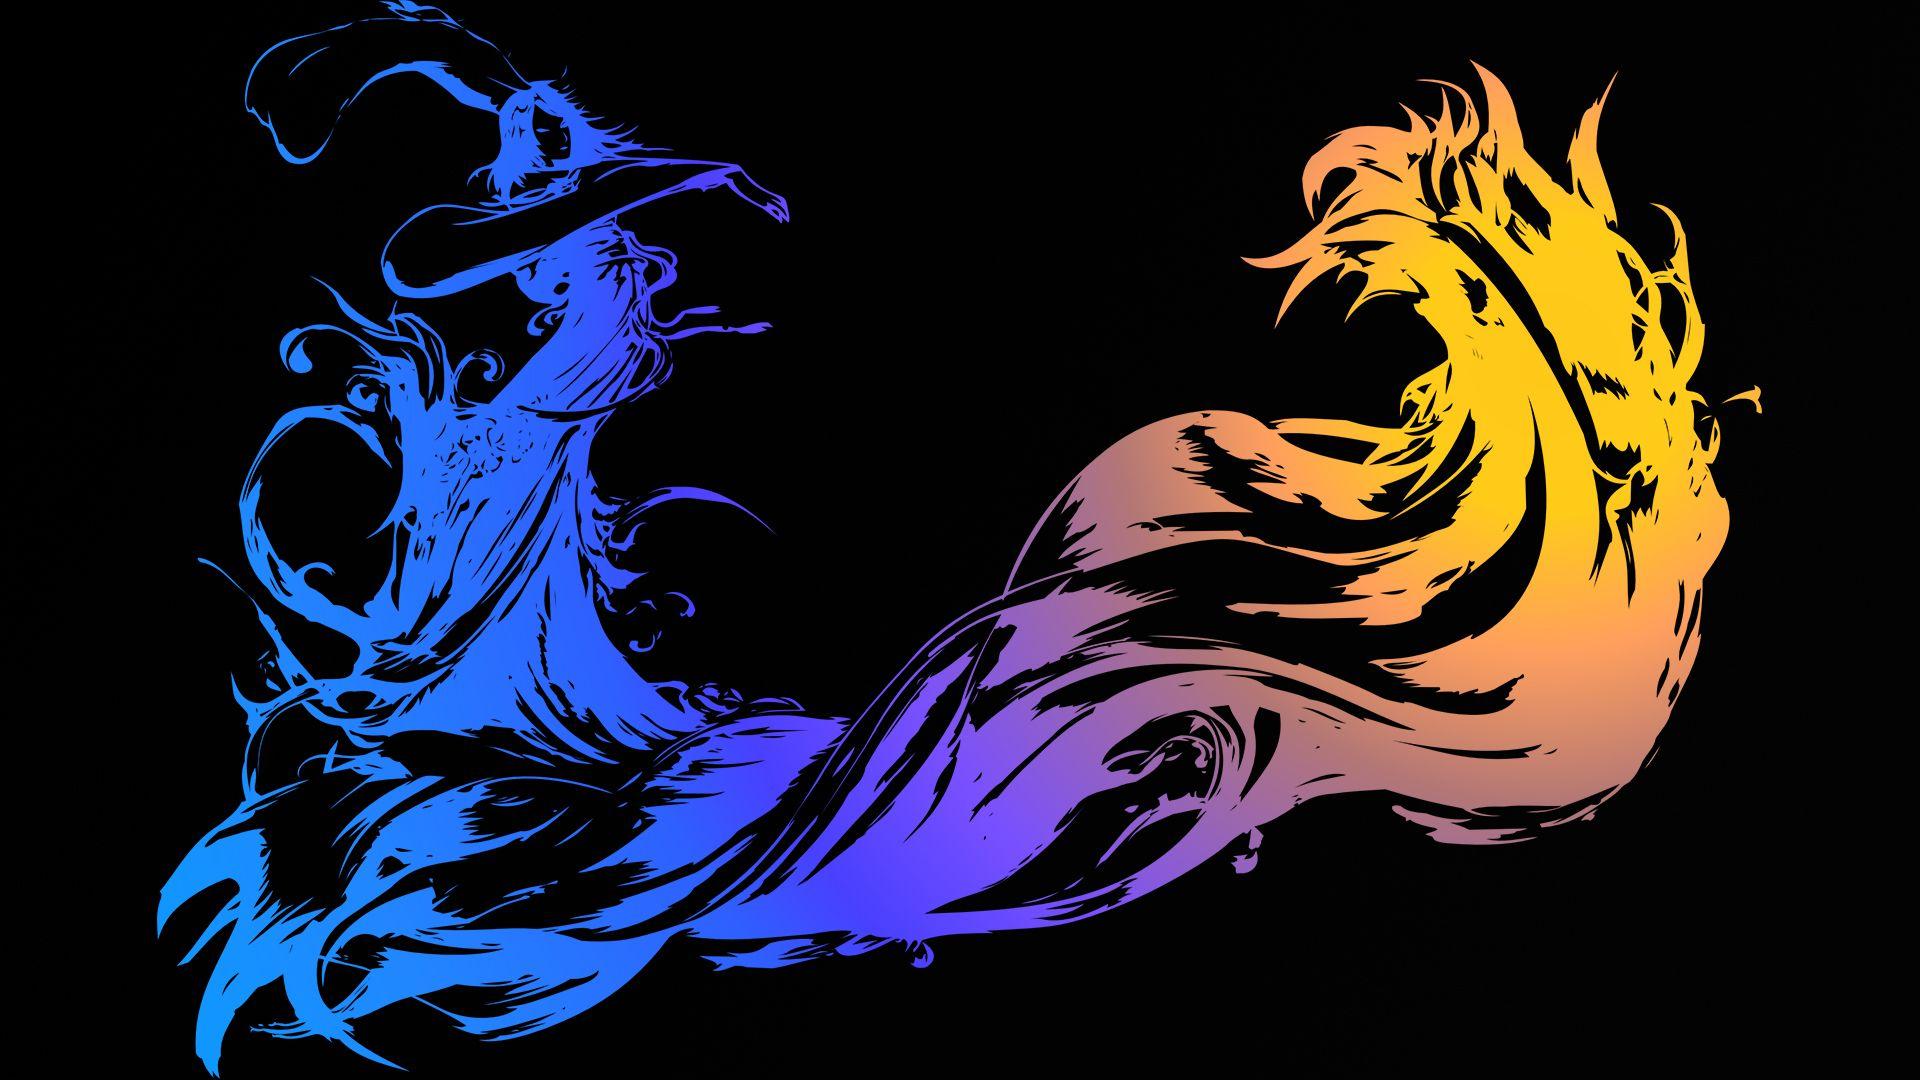 Someone requested it, so I made a Final Fantasy X wallpaper. Here it